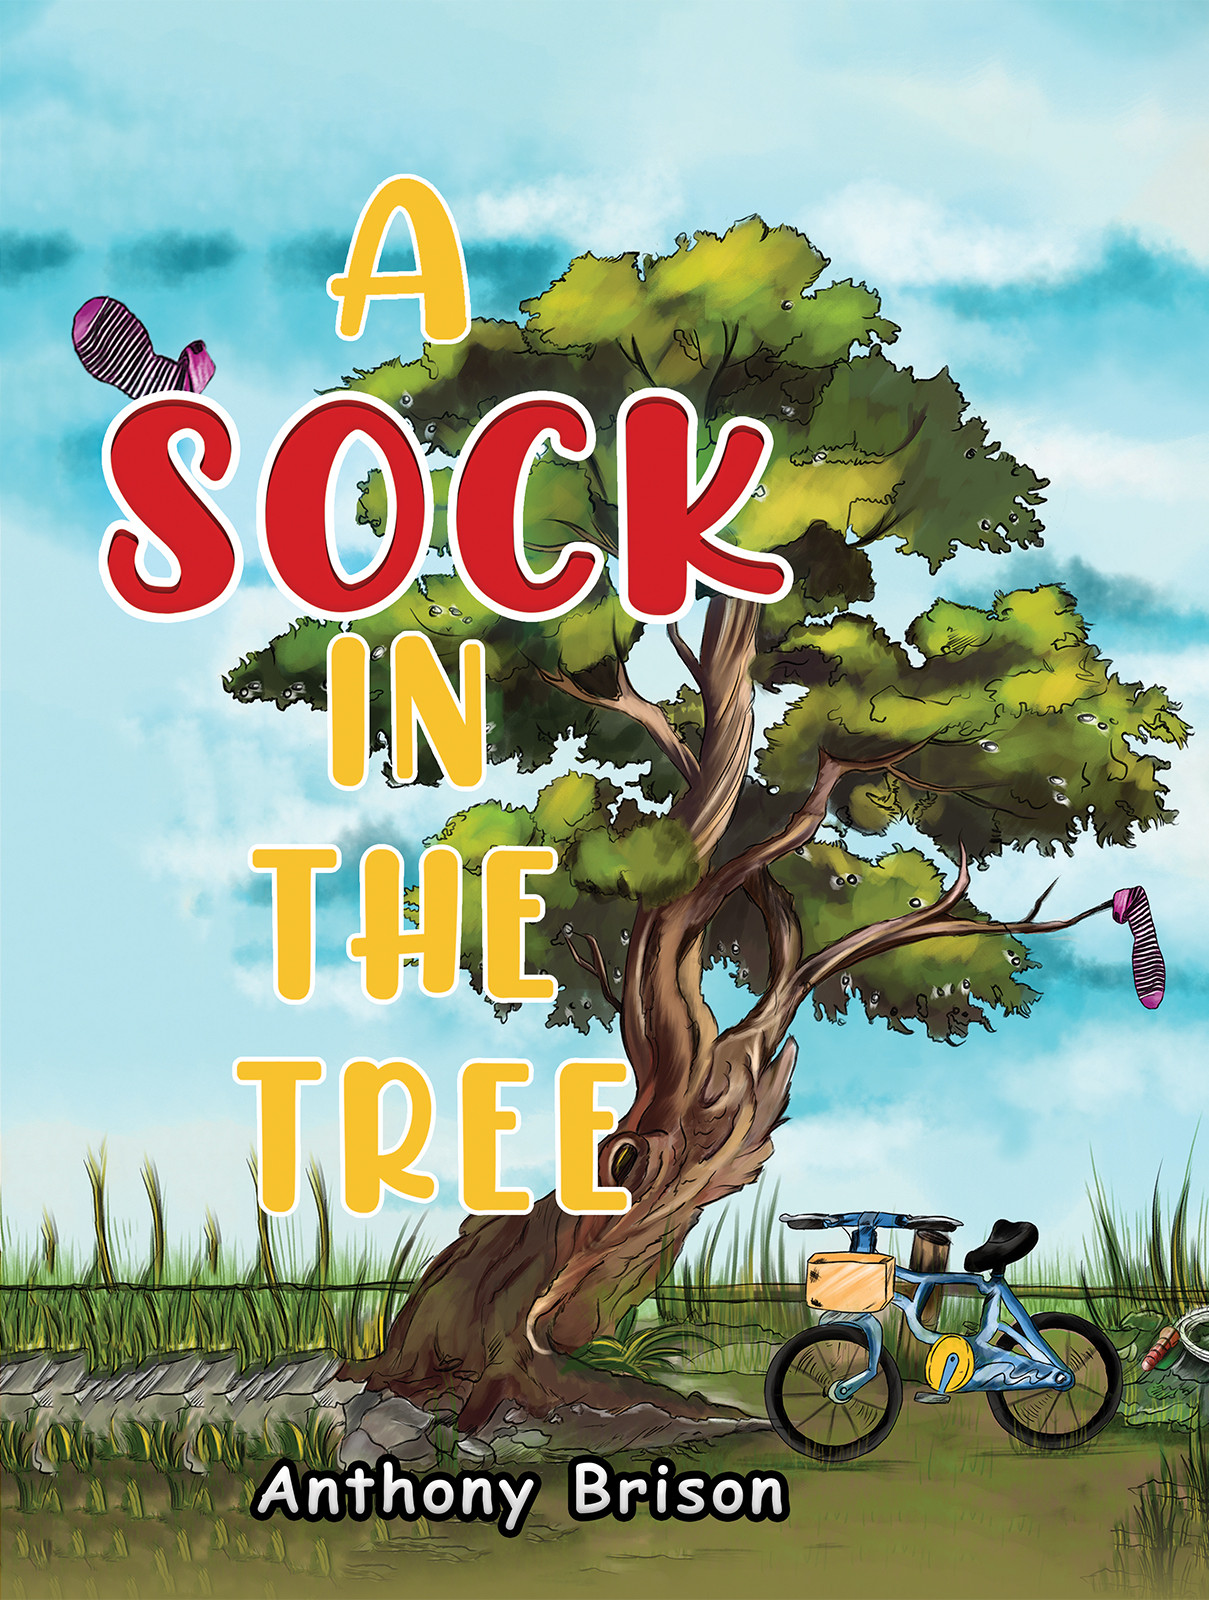 A Sock in the Tree